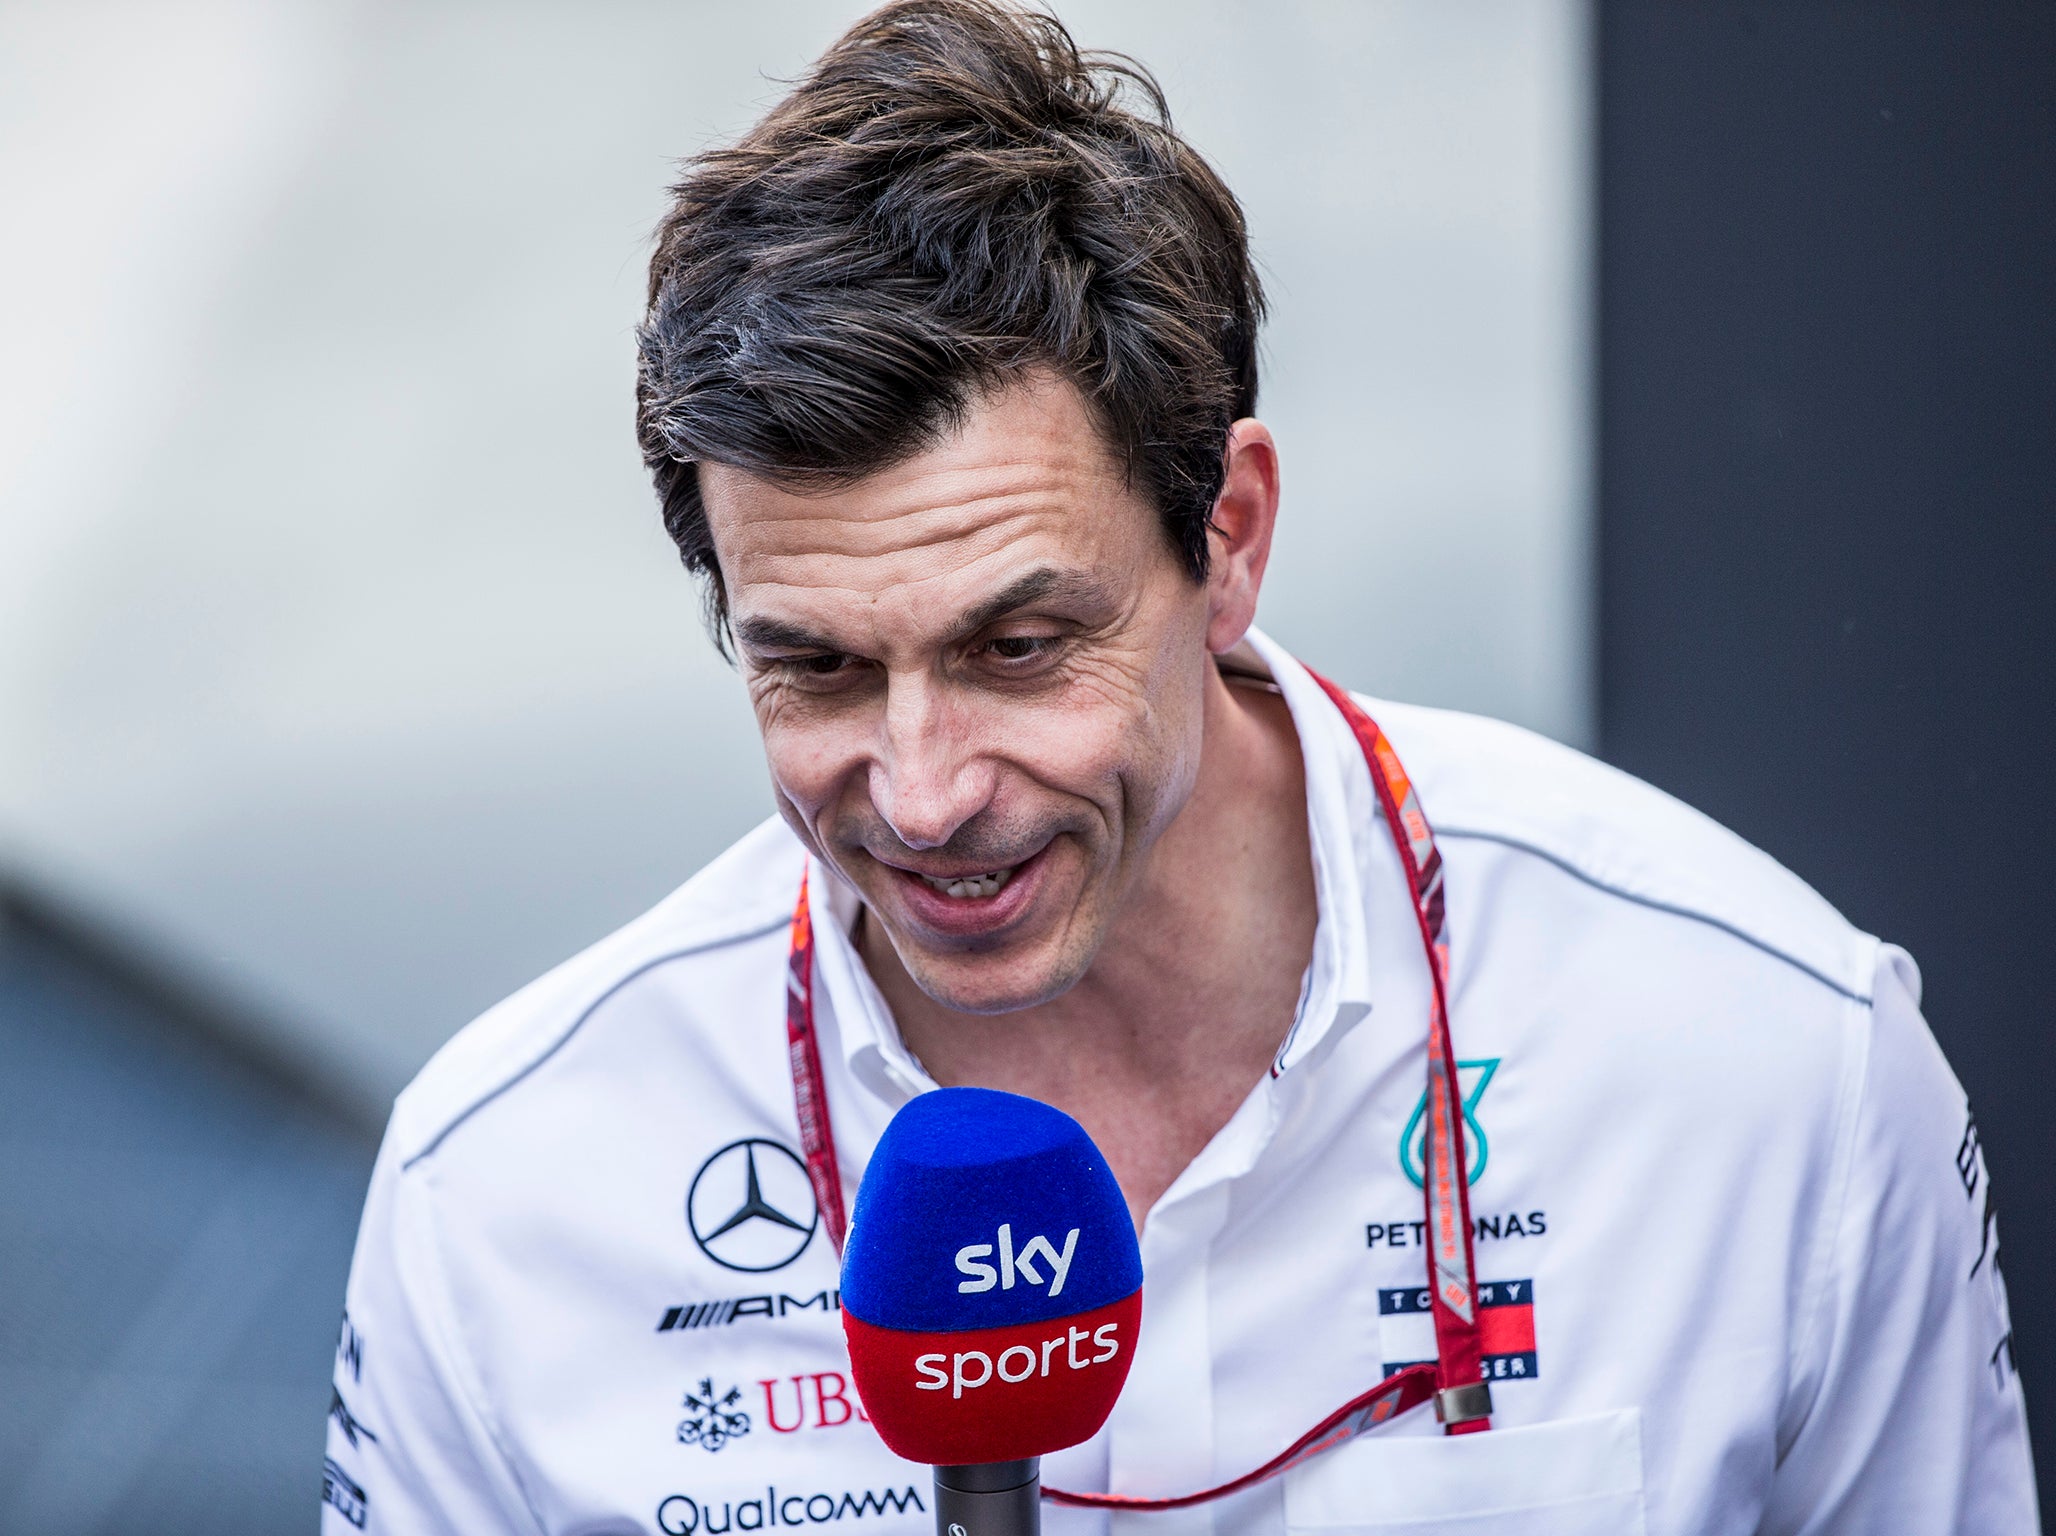 Toto Wolff had much to say